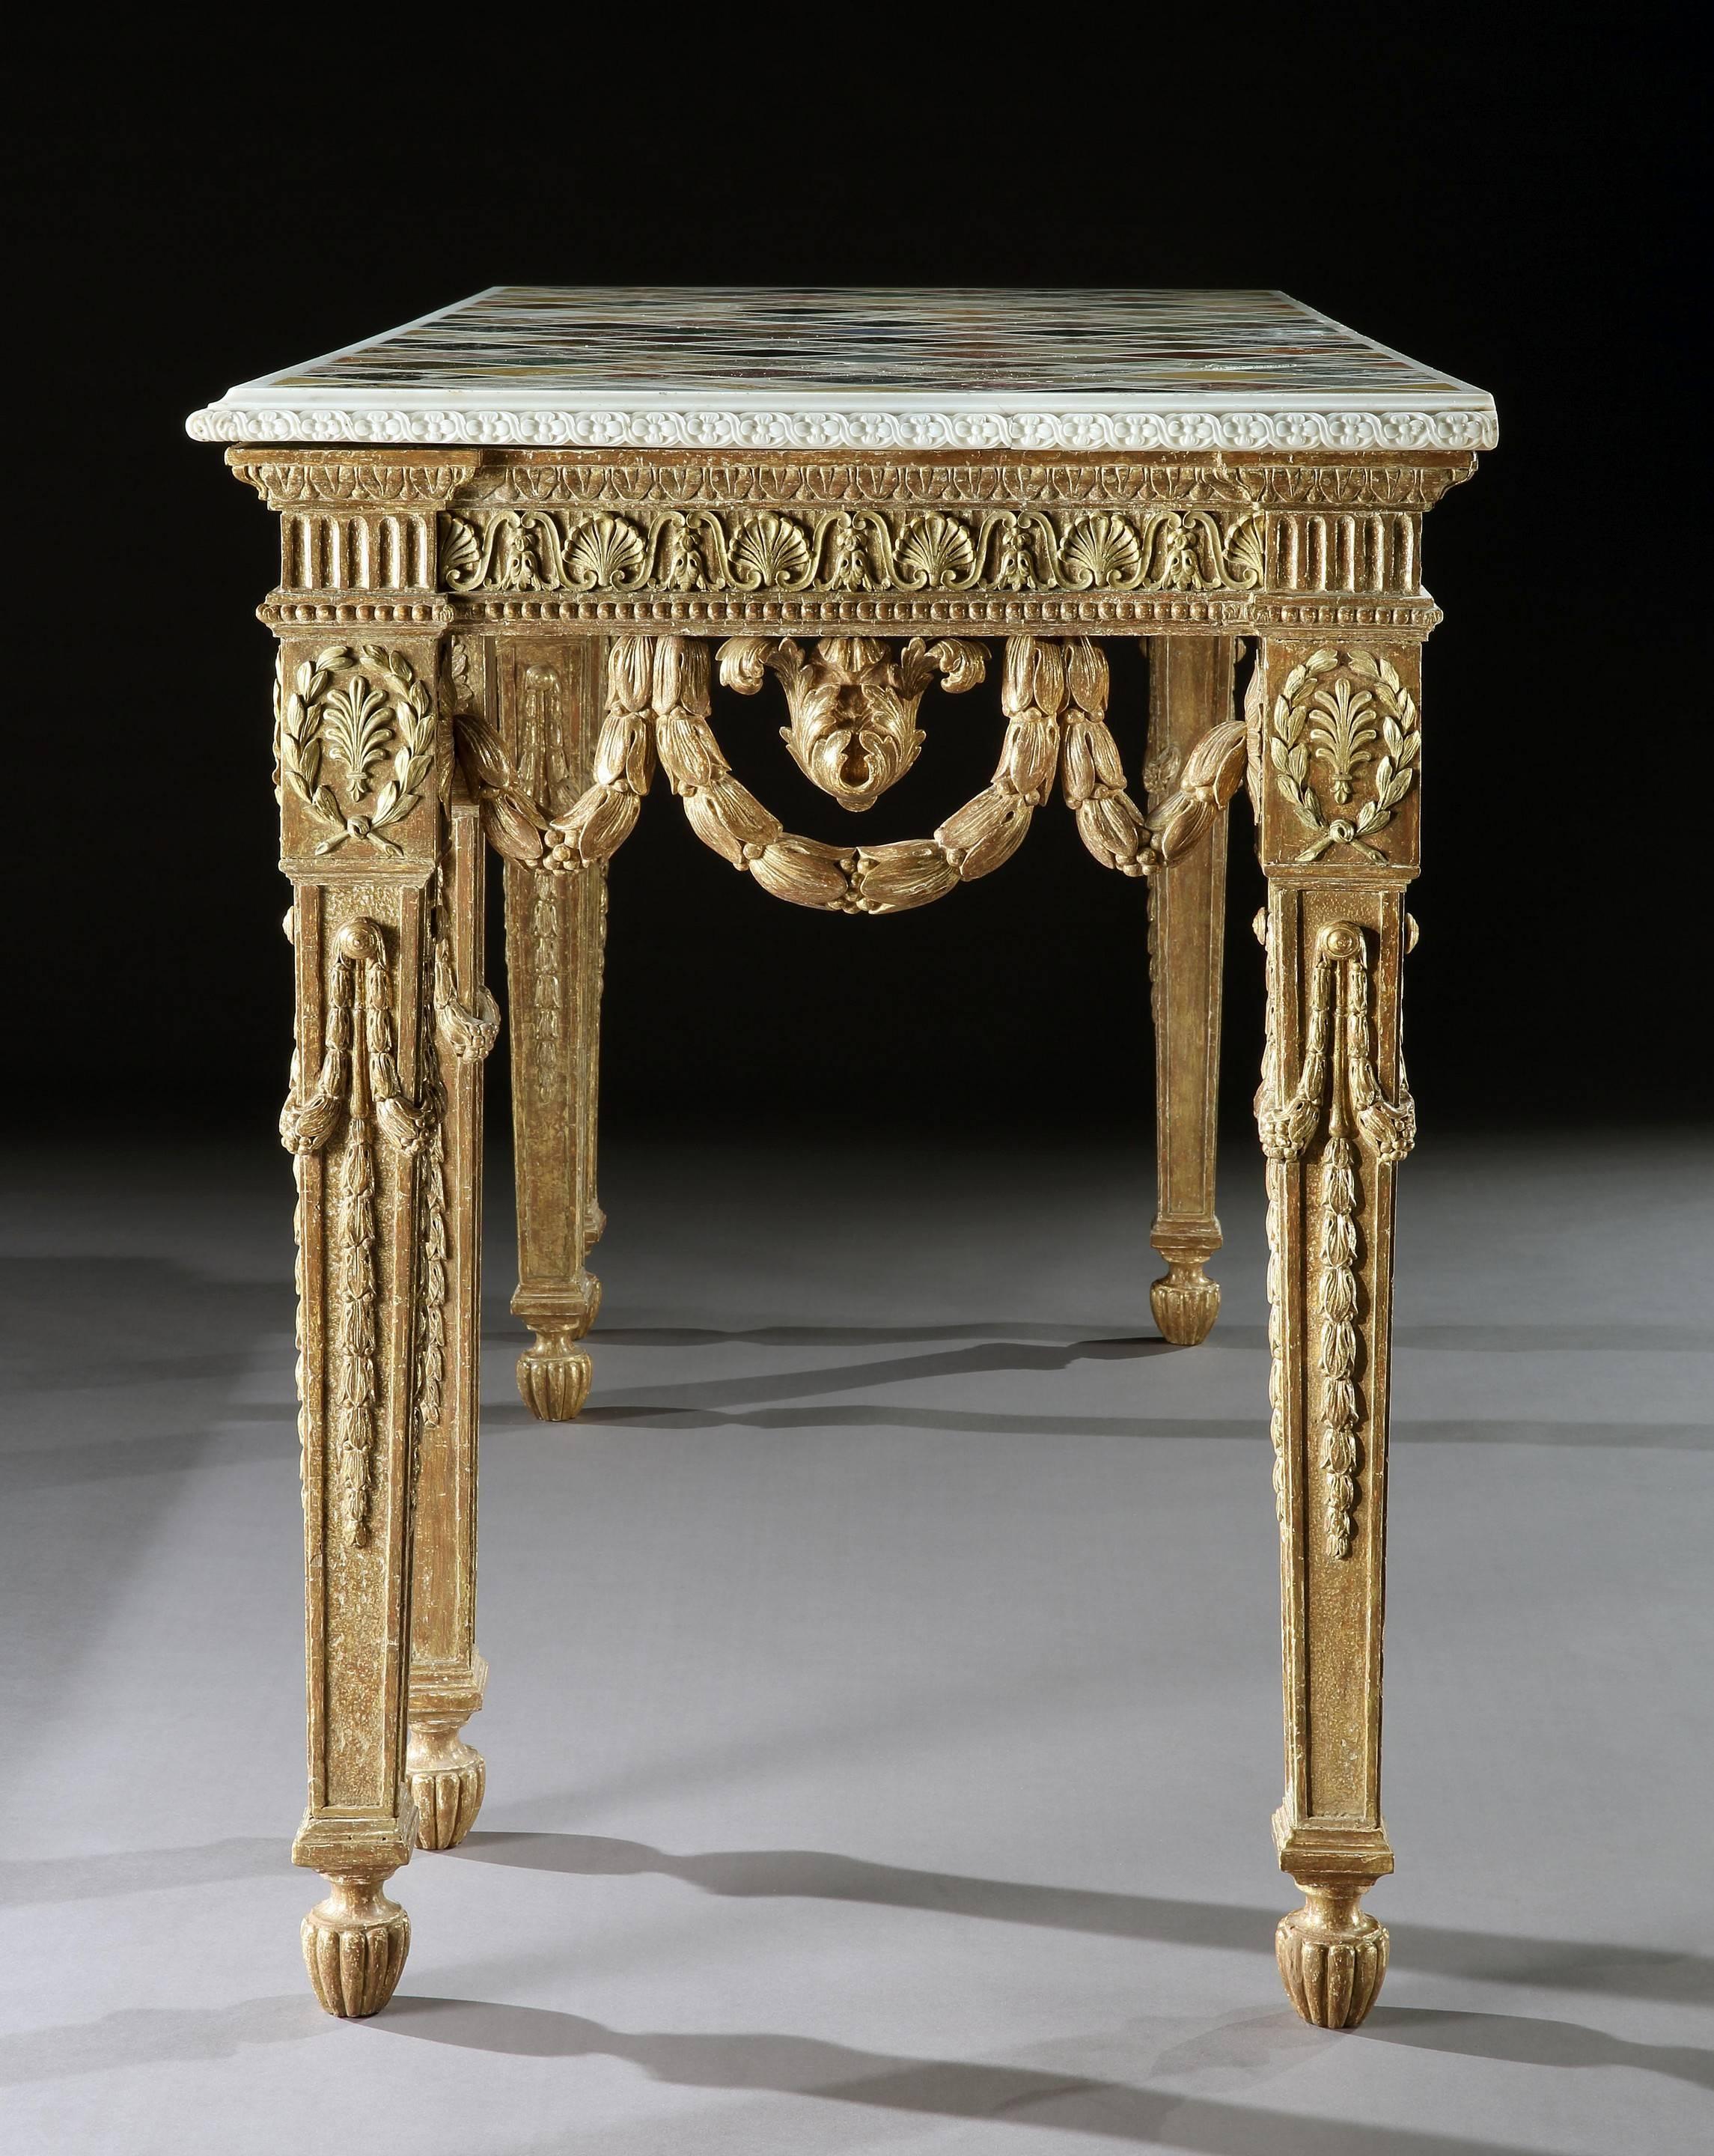 A George III giltwood side table by John Linnell with a Roman specimen marble top. 

The giltwood base closely follows two design drawings by John Linnell, dated 1765, which are preserved in the Victoria and Albert Museum, London. As the Linnell’s